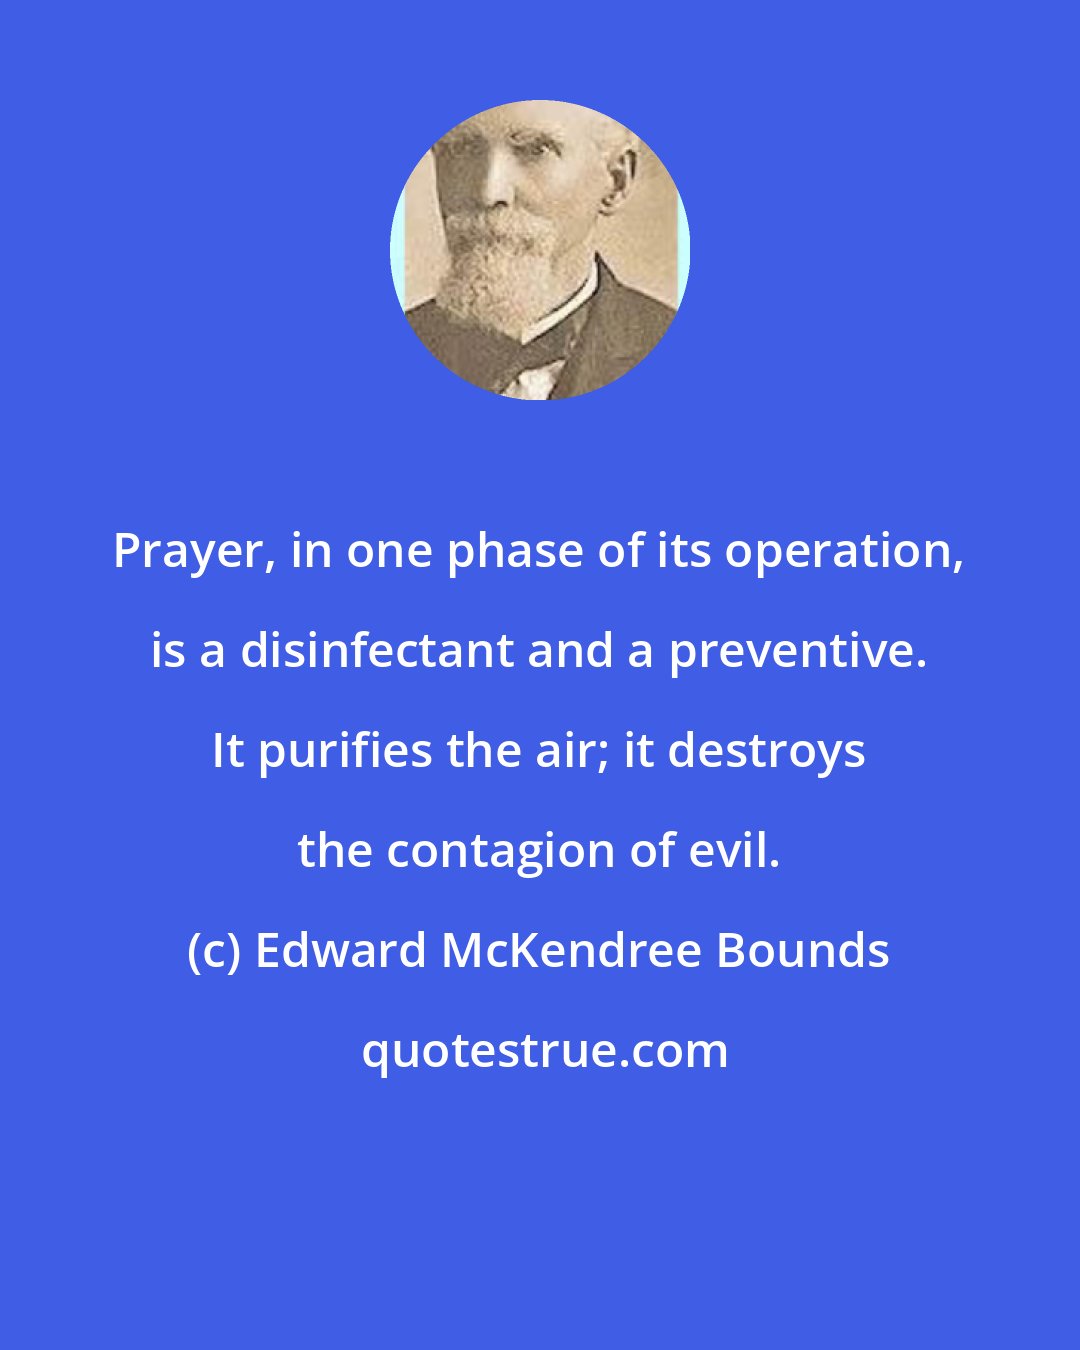 Edward McKendree Bounds: Prayer, in one phase of its operation, is a disinfectant and a preventive. It purifies the air; it destroys the contagion of evil.